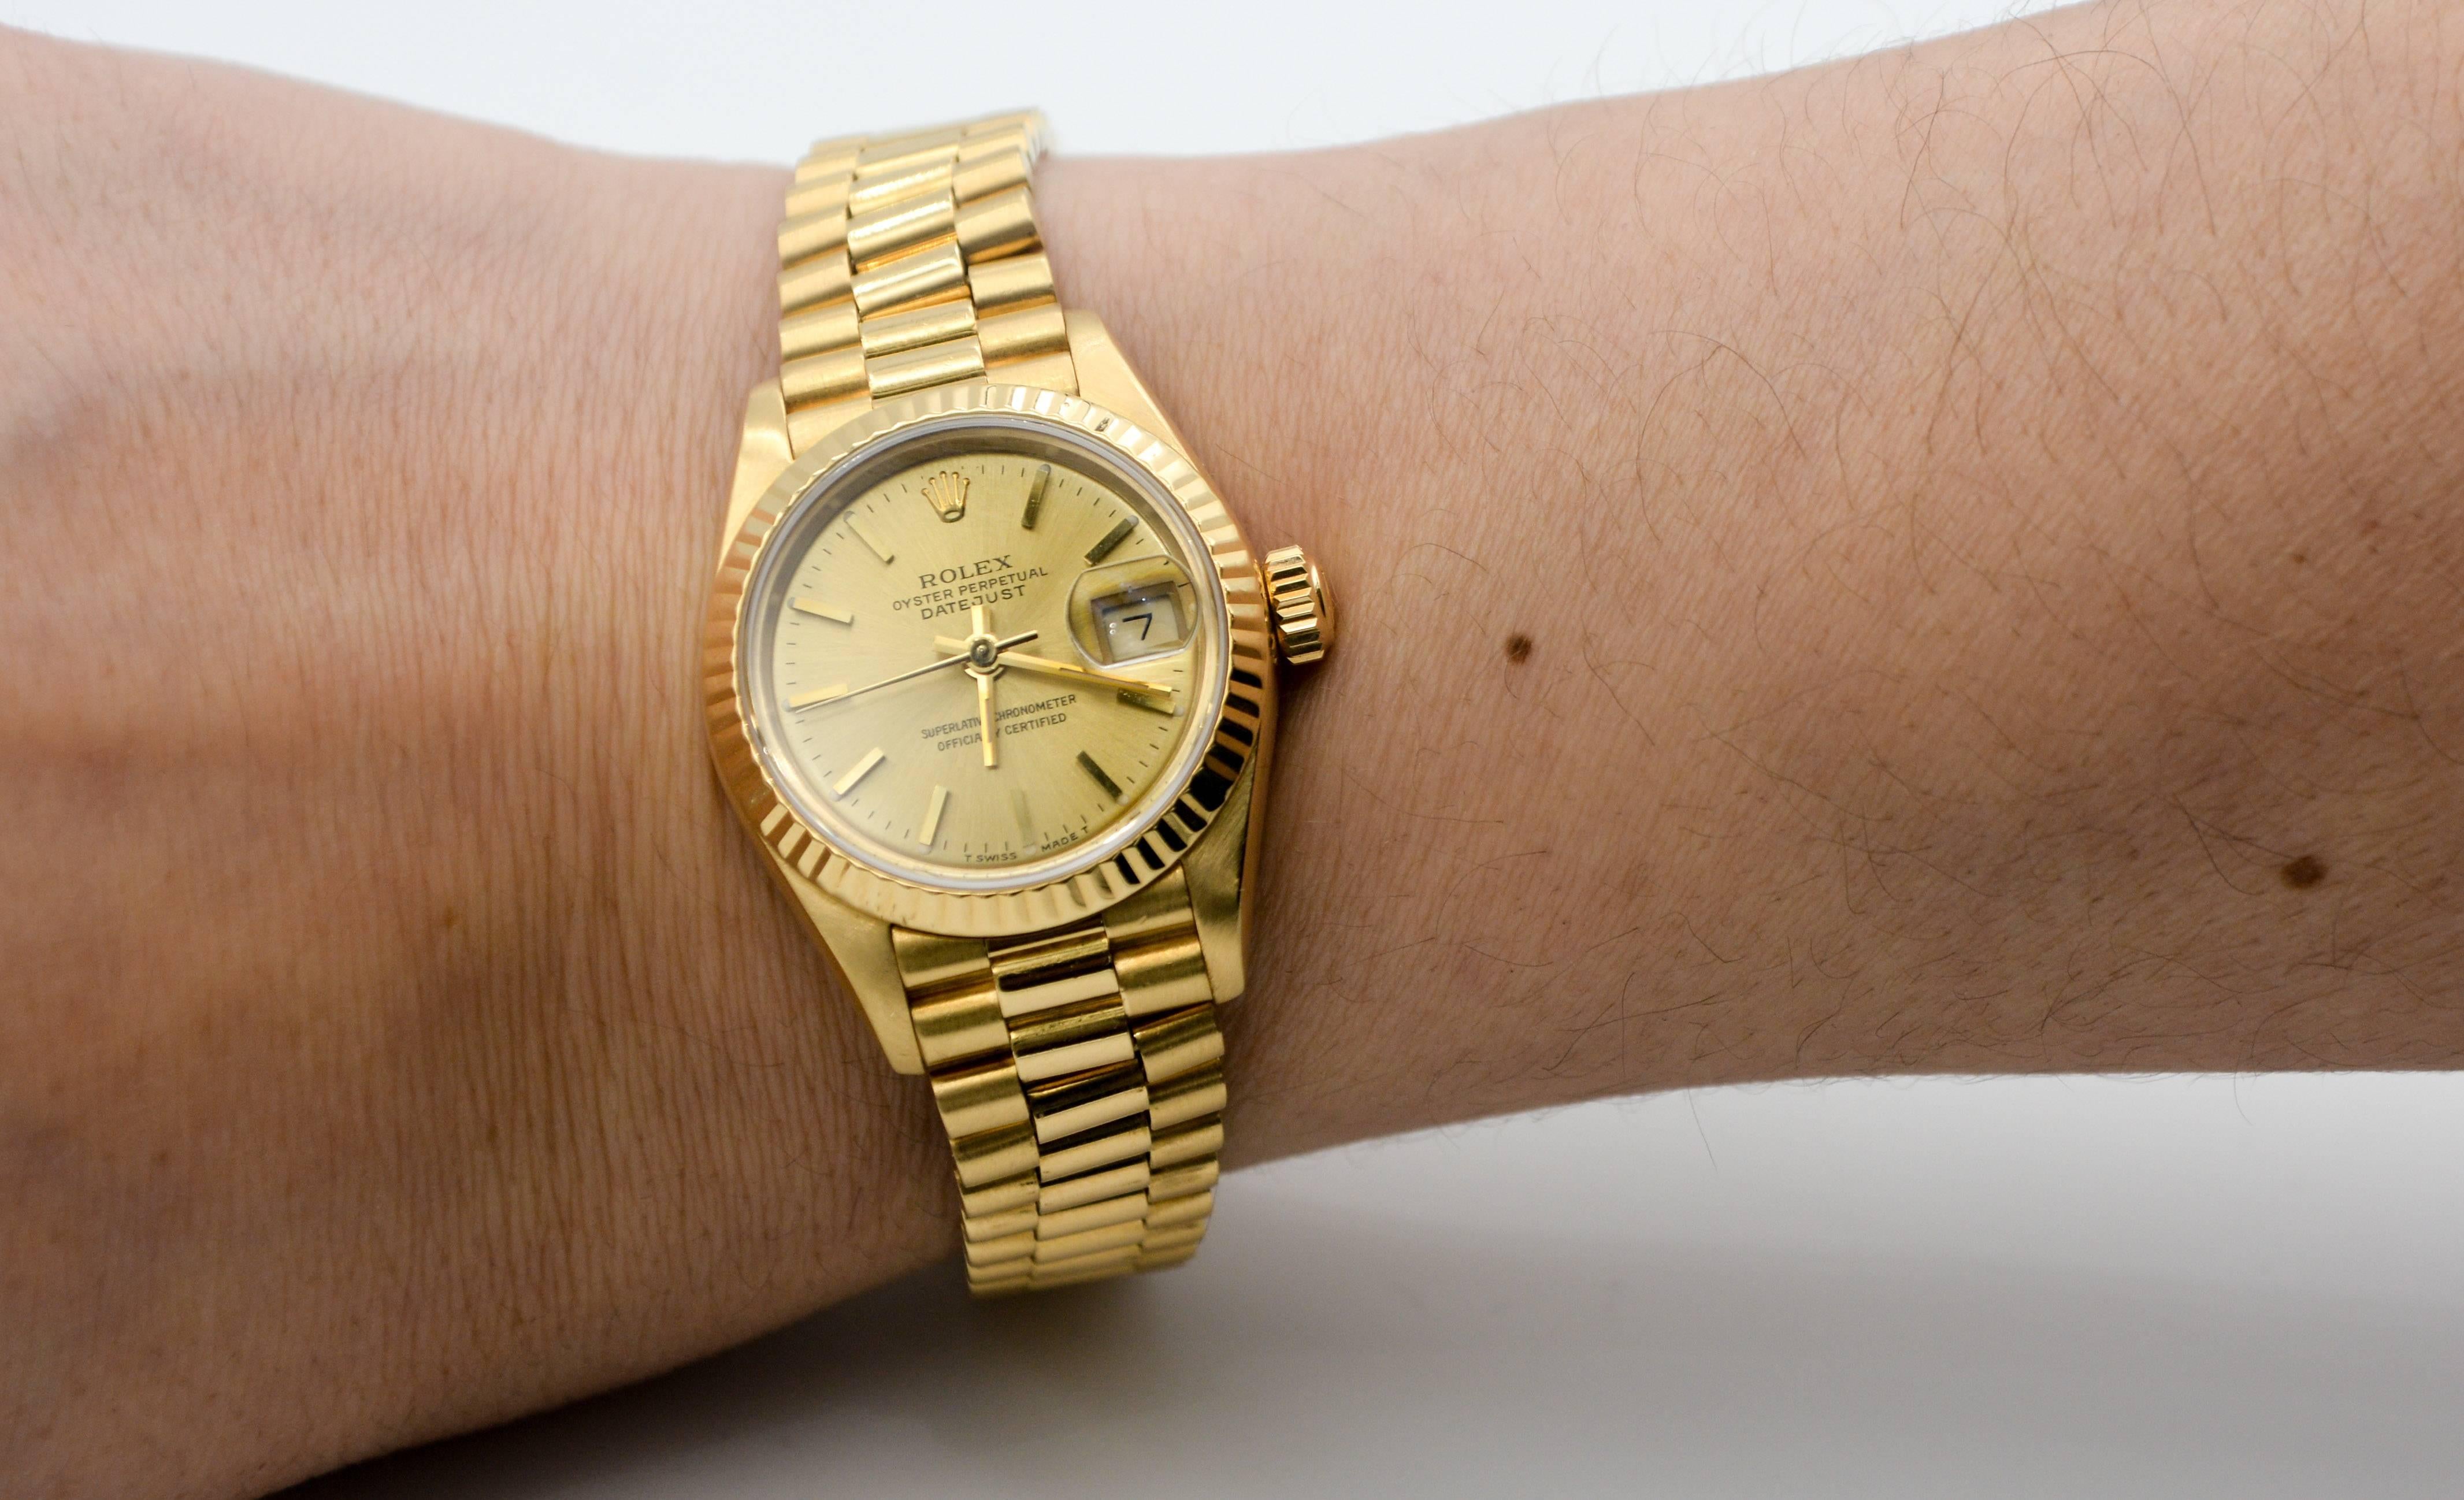 This classic ladies Rolex Datejust President model 69178 is crafted in in 18kt yellow gold. The case is 26 mm and is accented with the classic Rolex Champagne dial and index dial markers.  This Rolex DateJust Presidential was manufatured Circa 1990